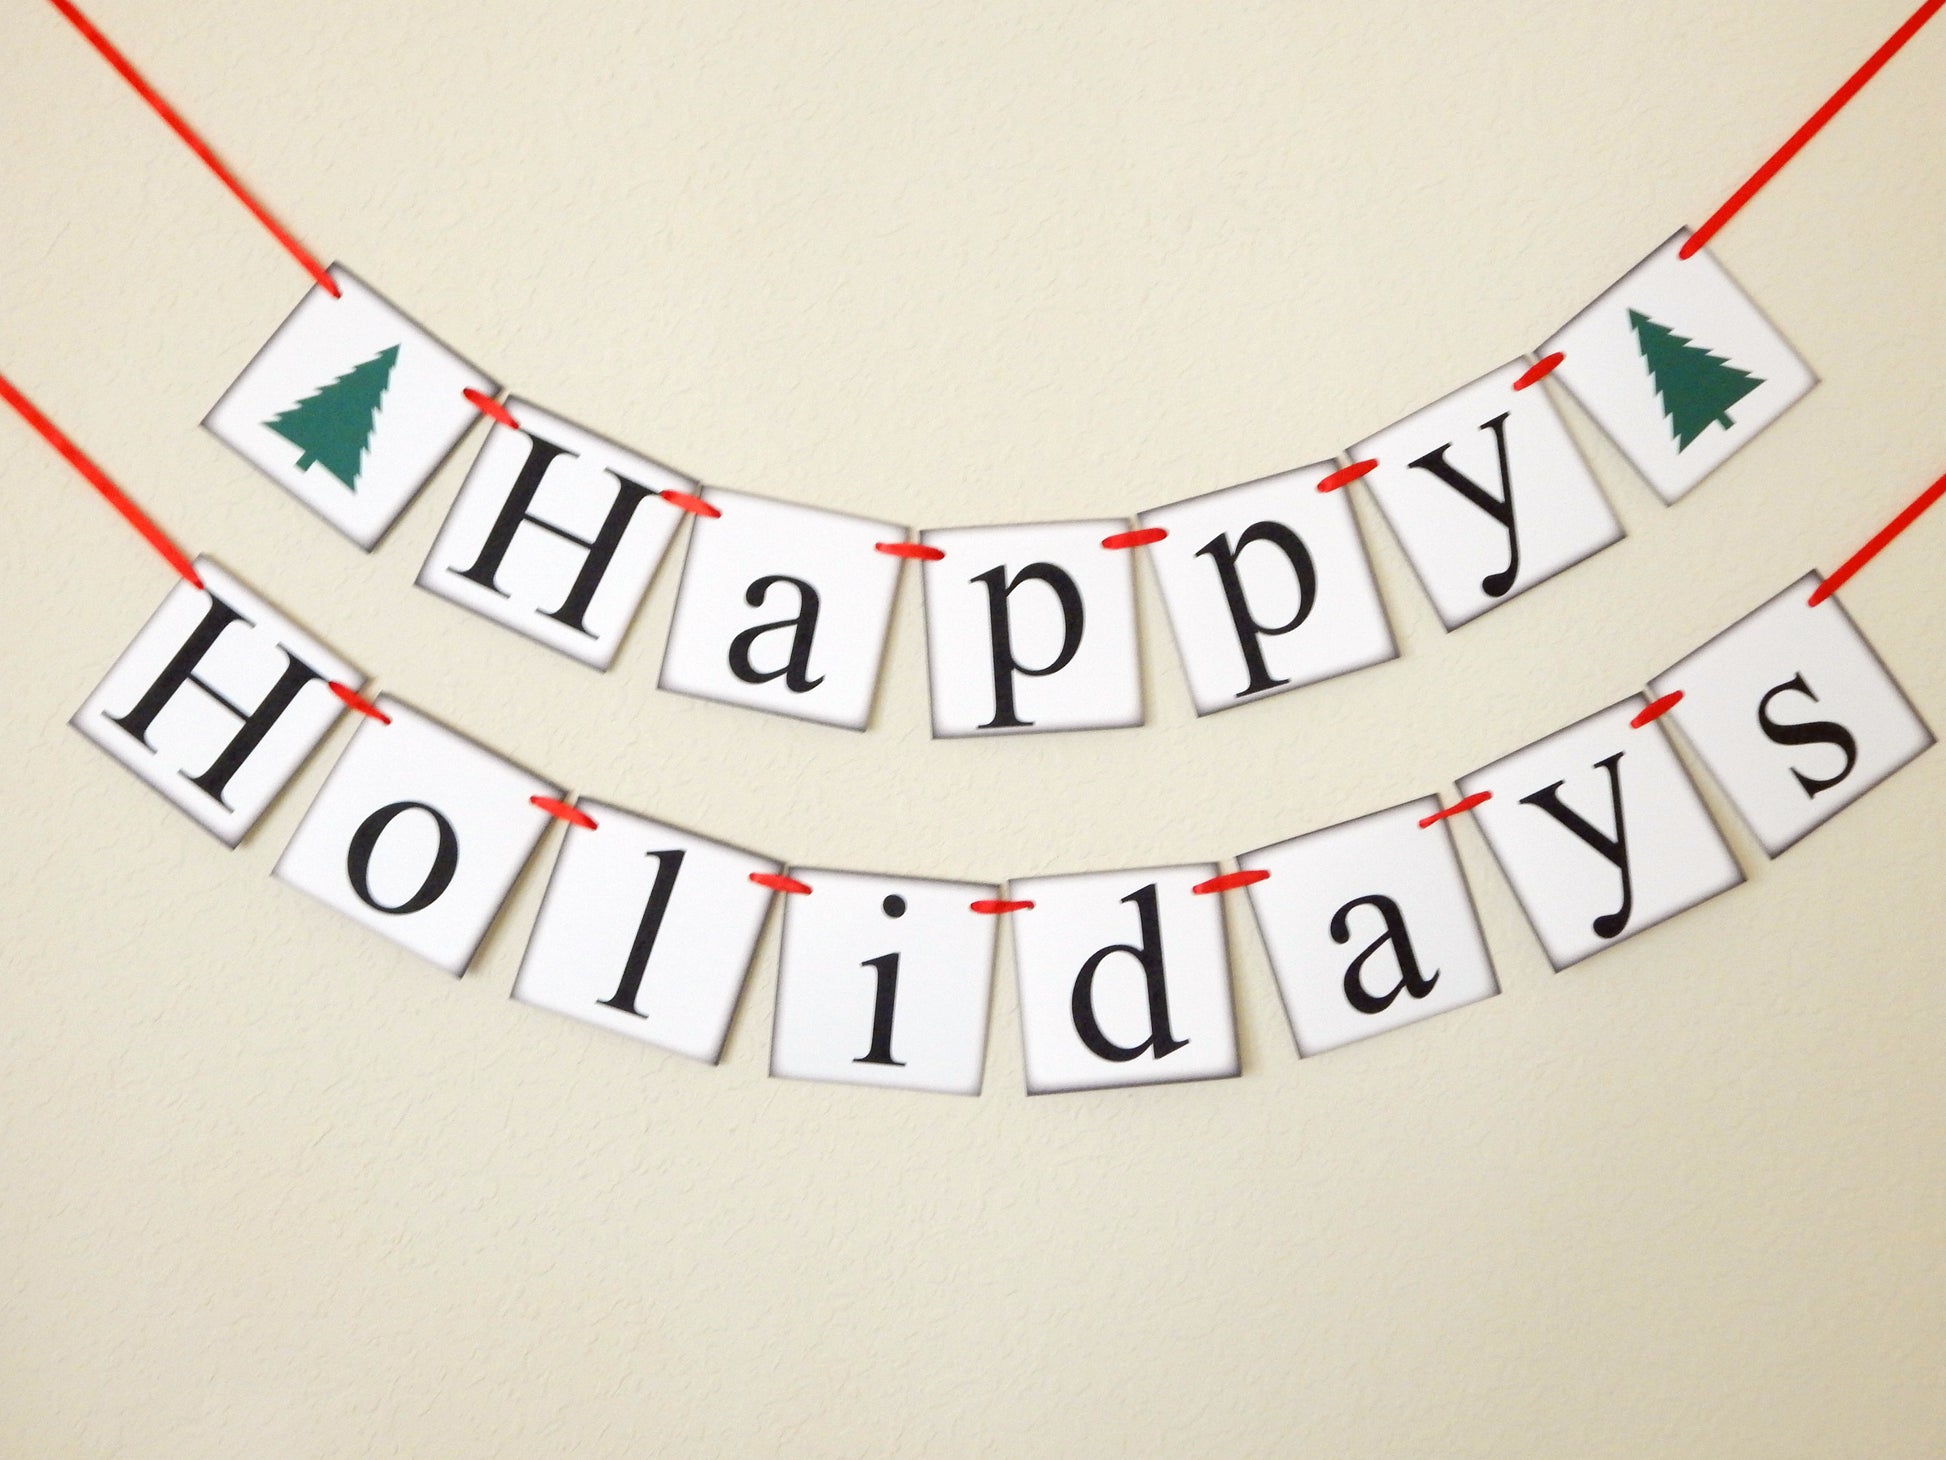 Happy holidays banner with Christmas trees - Christmas banner - Celebrating Together